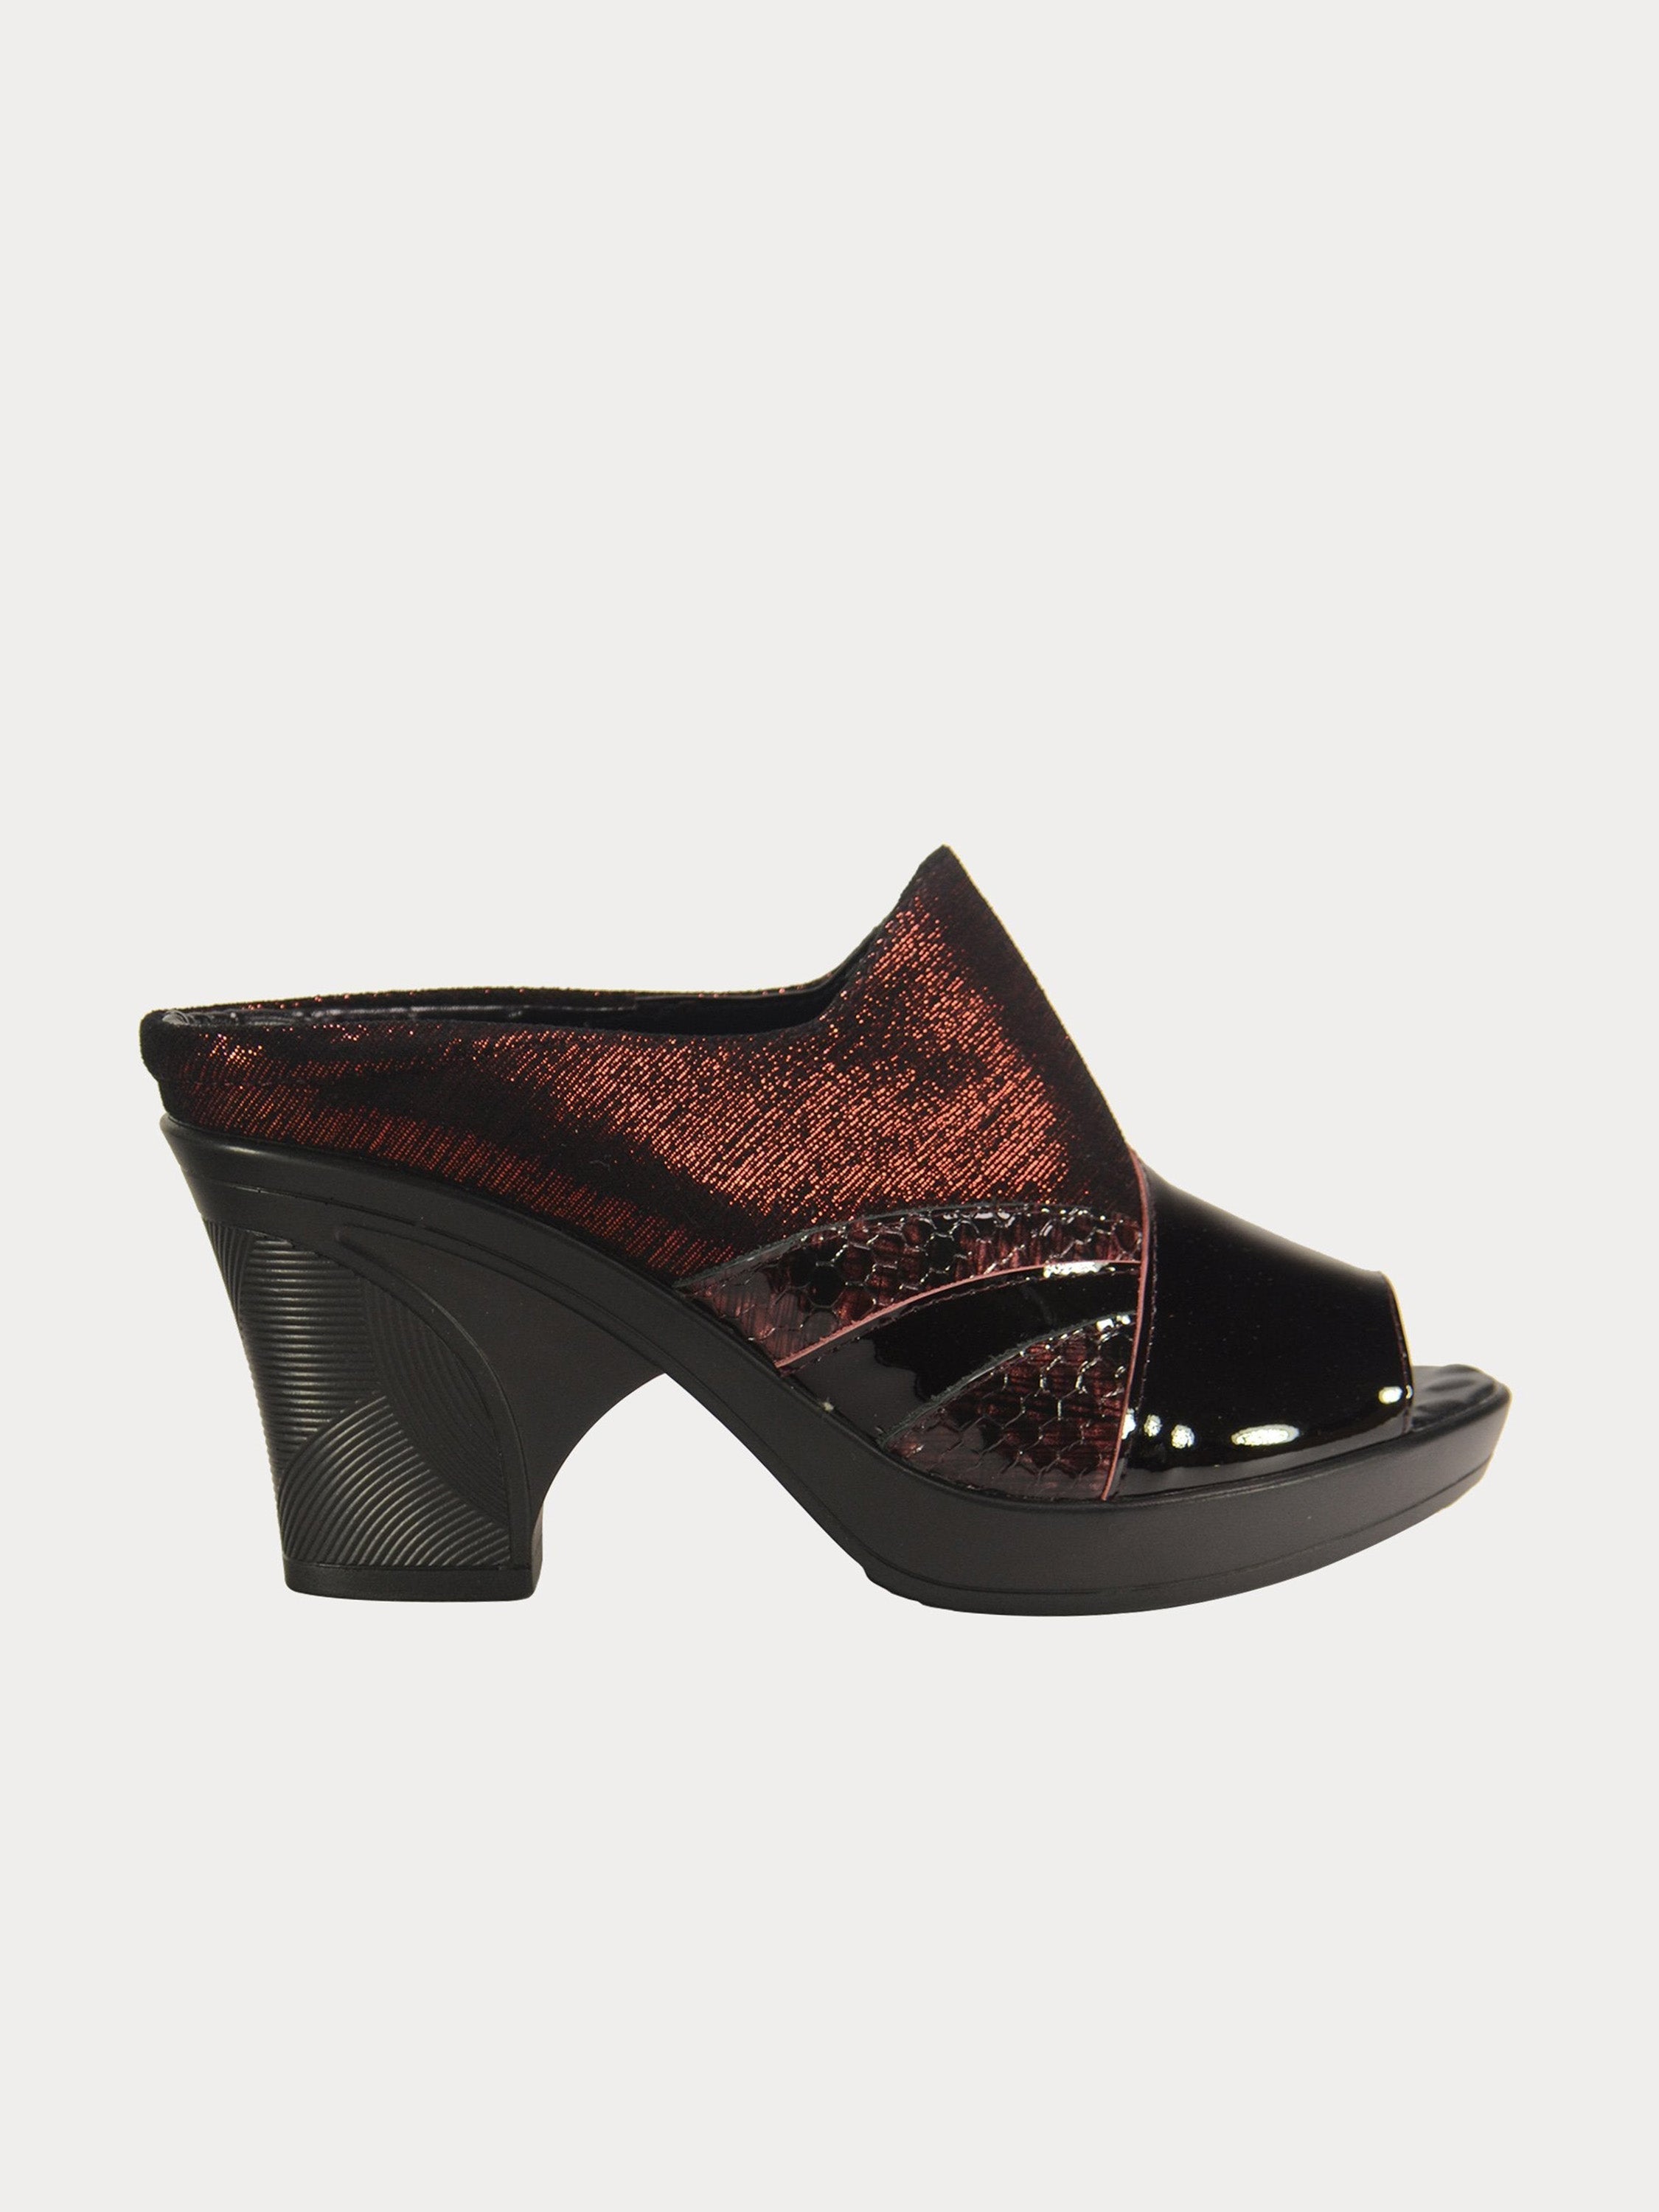 Michelle Morgan 190173 Patent Leather Strap Heels #color_Maroon